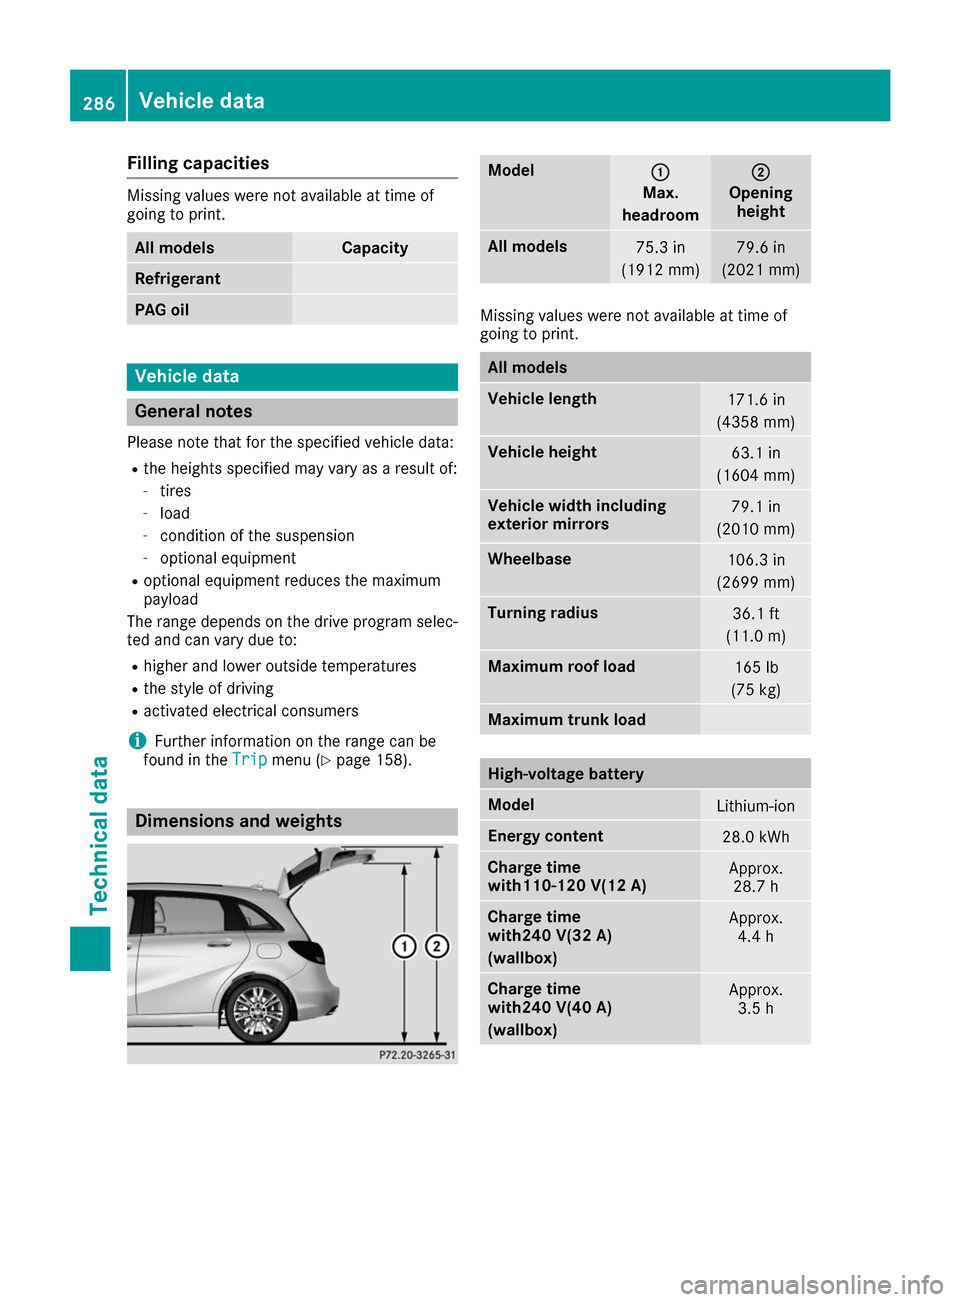 MERCEDES-BENZ B-Class 2017 W246 Owners Manual Filling capacities
Missing values were not available at time of
going to print. All models Capacity
Refrigerant
PAG oil
Vehicle data
General notes
Please note that for the specified vehicle data: R th